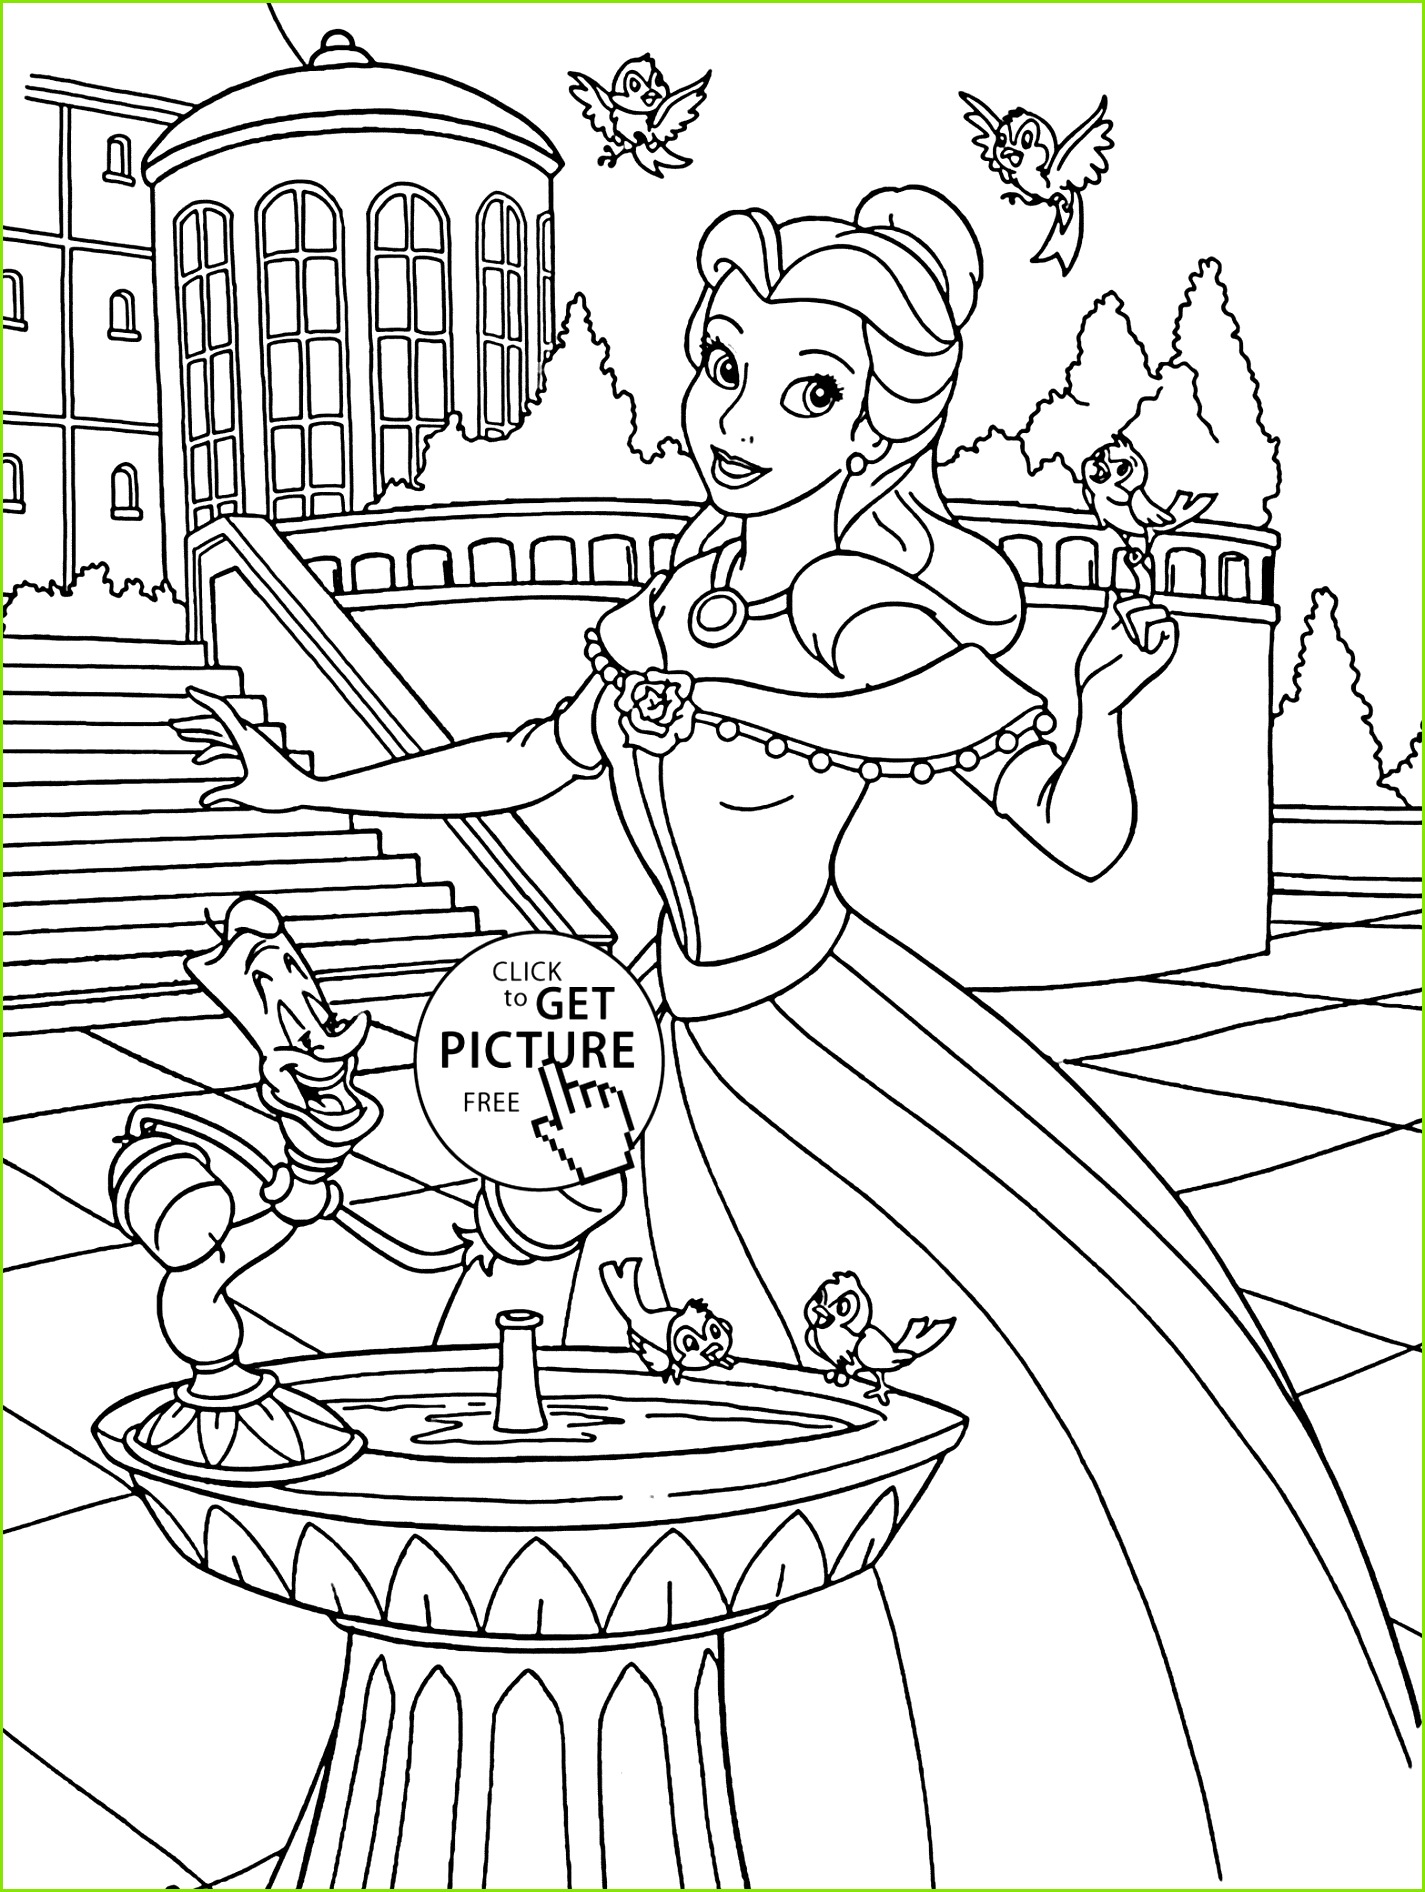 Free Coloring Pages Template Beautiful Coloring Pages Crown Crown Coloring Page Crown Template 0d